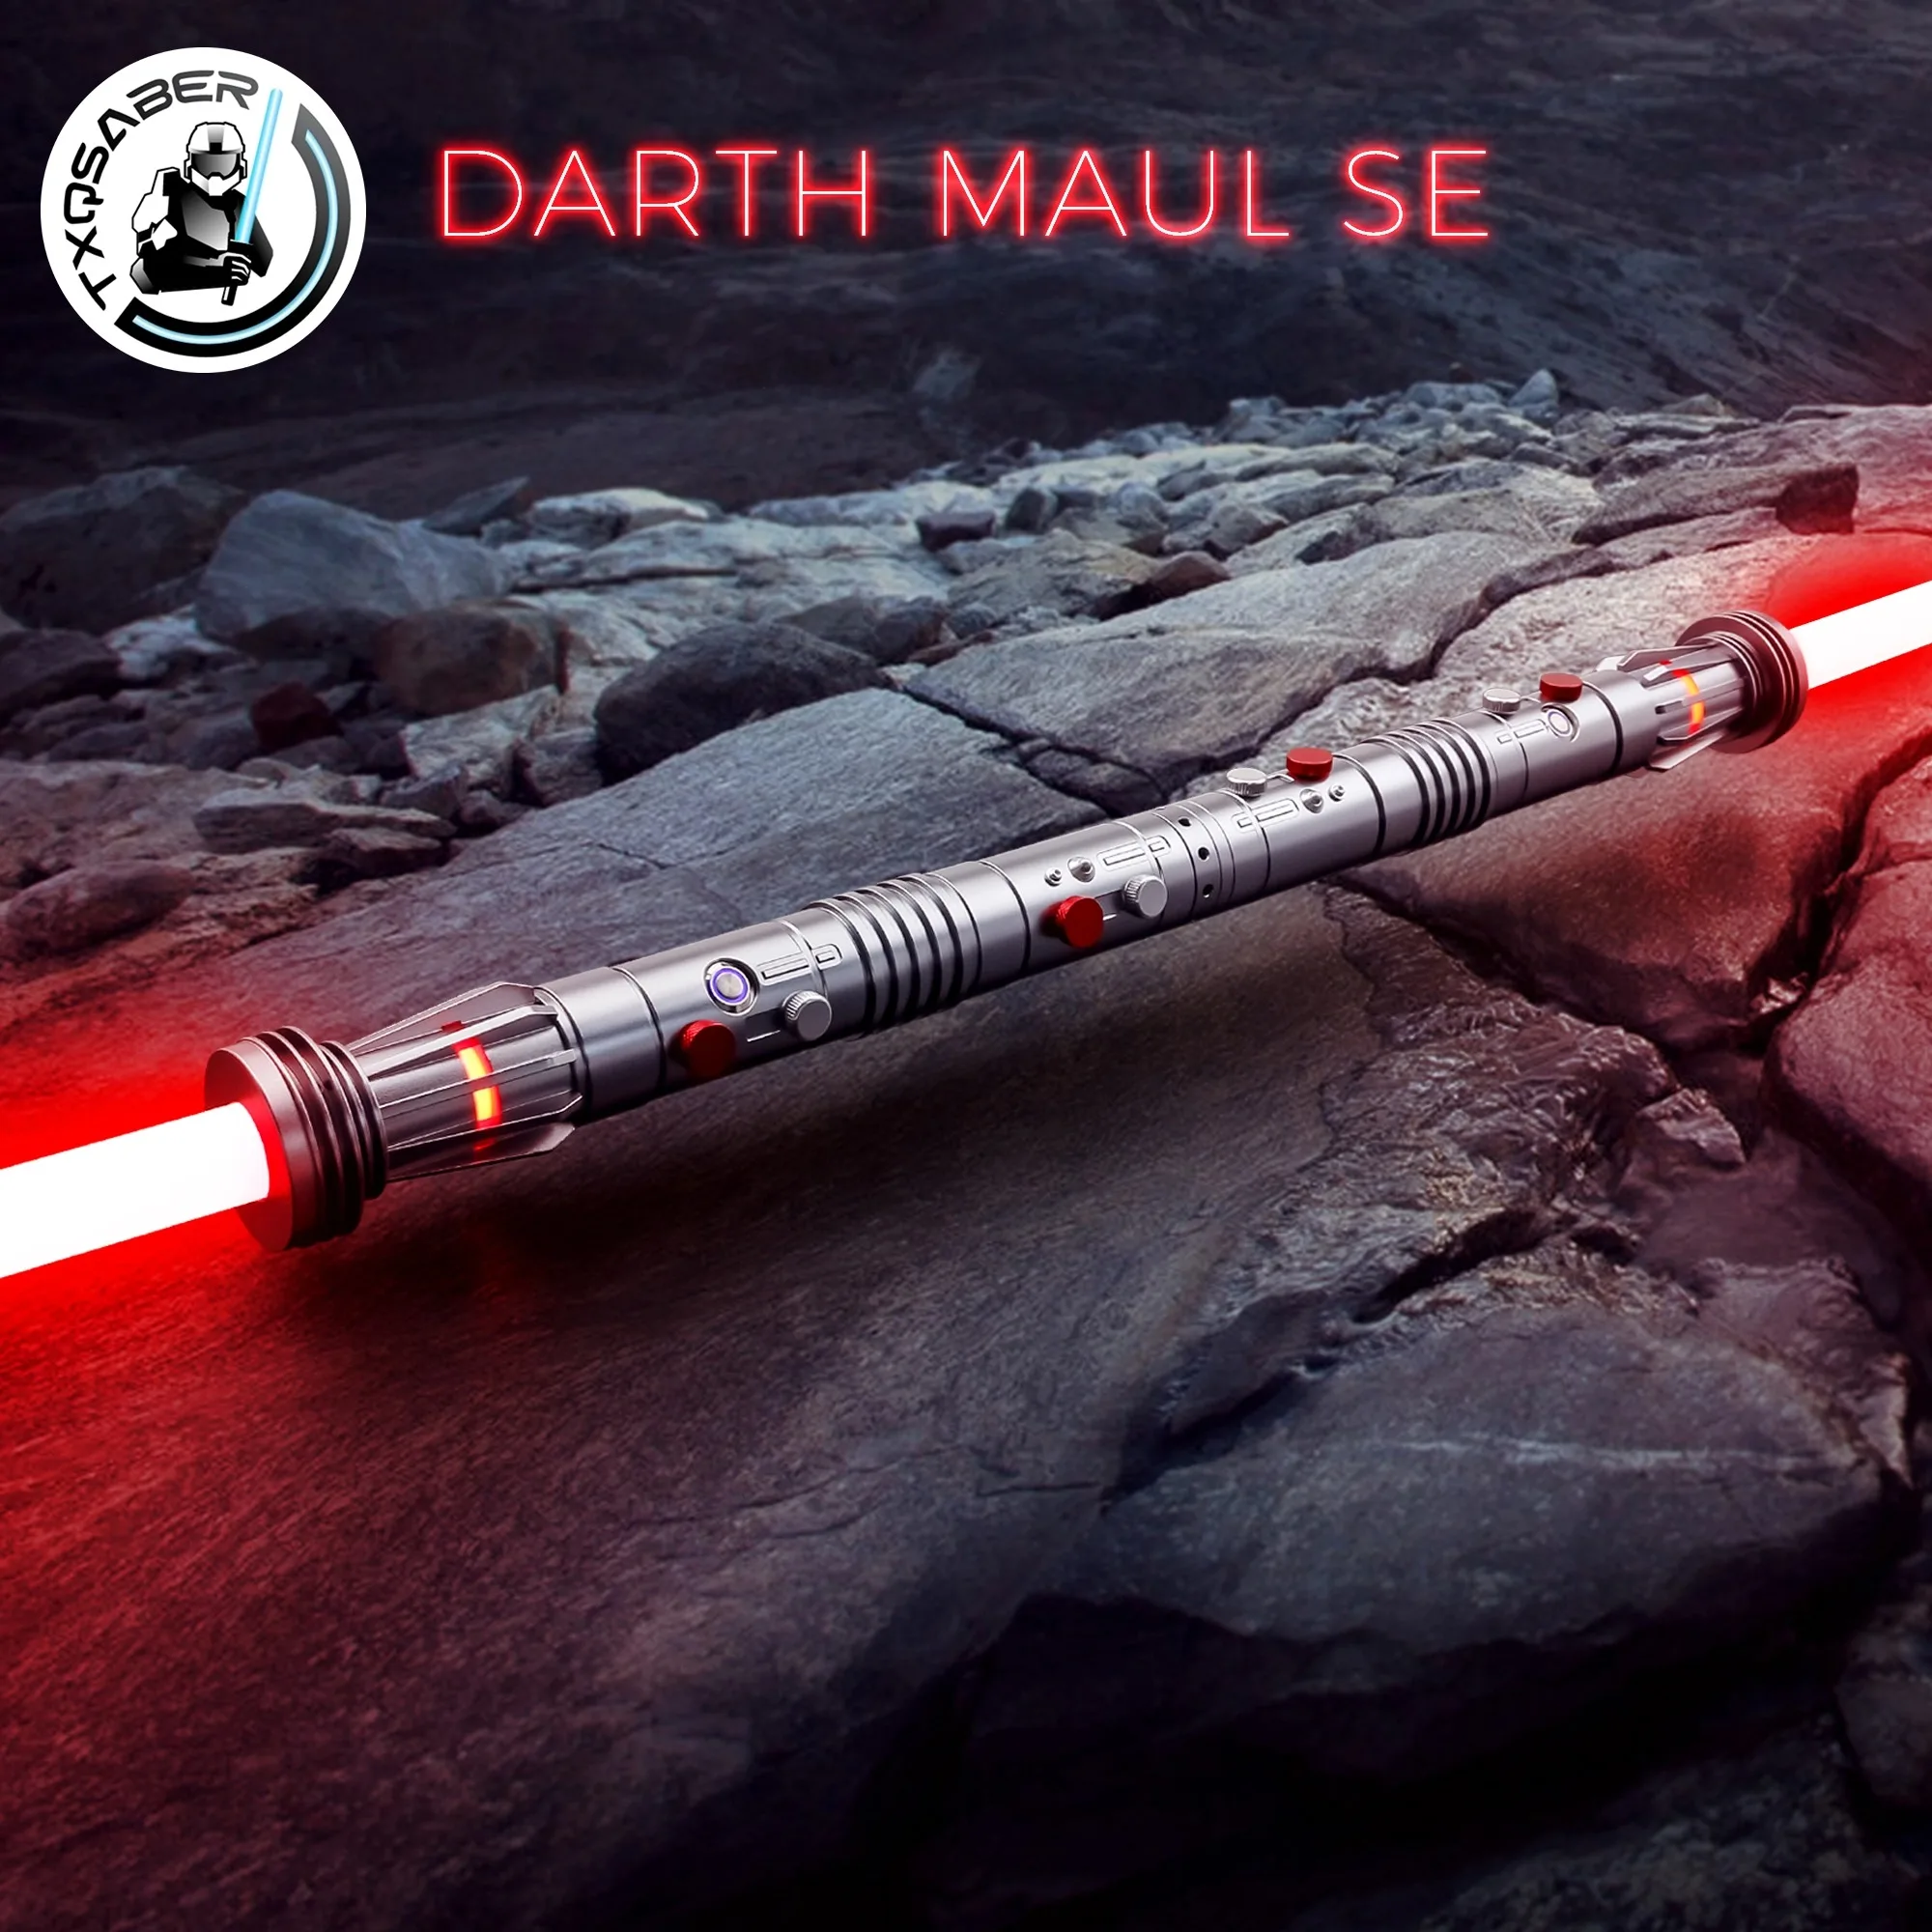 

TXQ Darth Maul SE 16sound 7/8inch Proffie NEO SNV4 Smooth Swing 12color Lightsaber Blaster Metal Toys Cosplay Glow Gift Laser